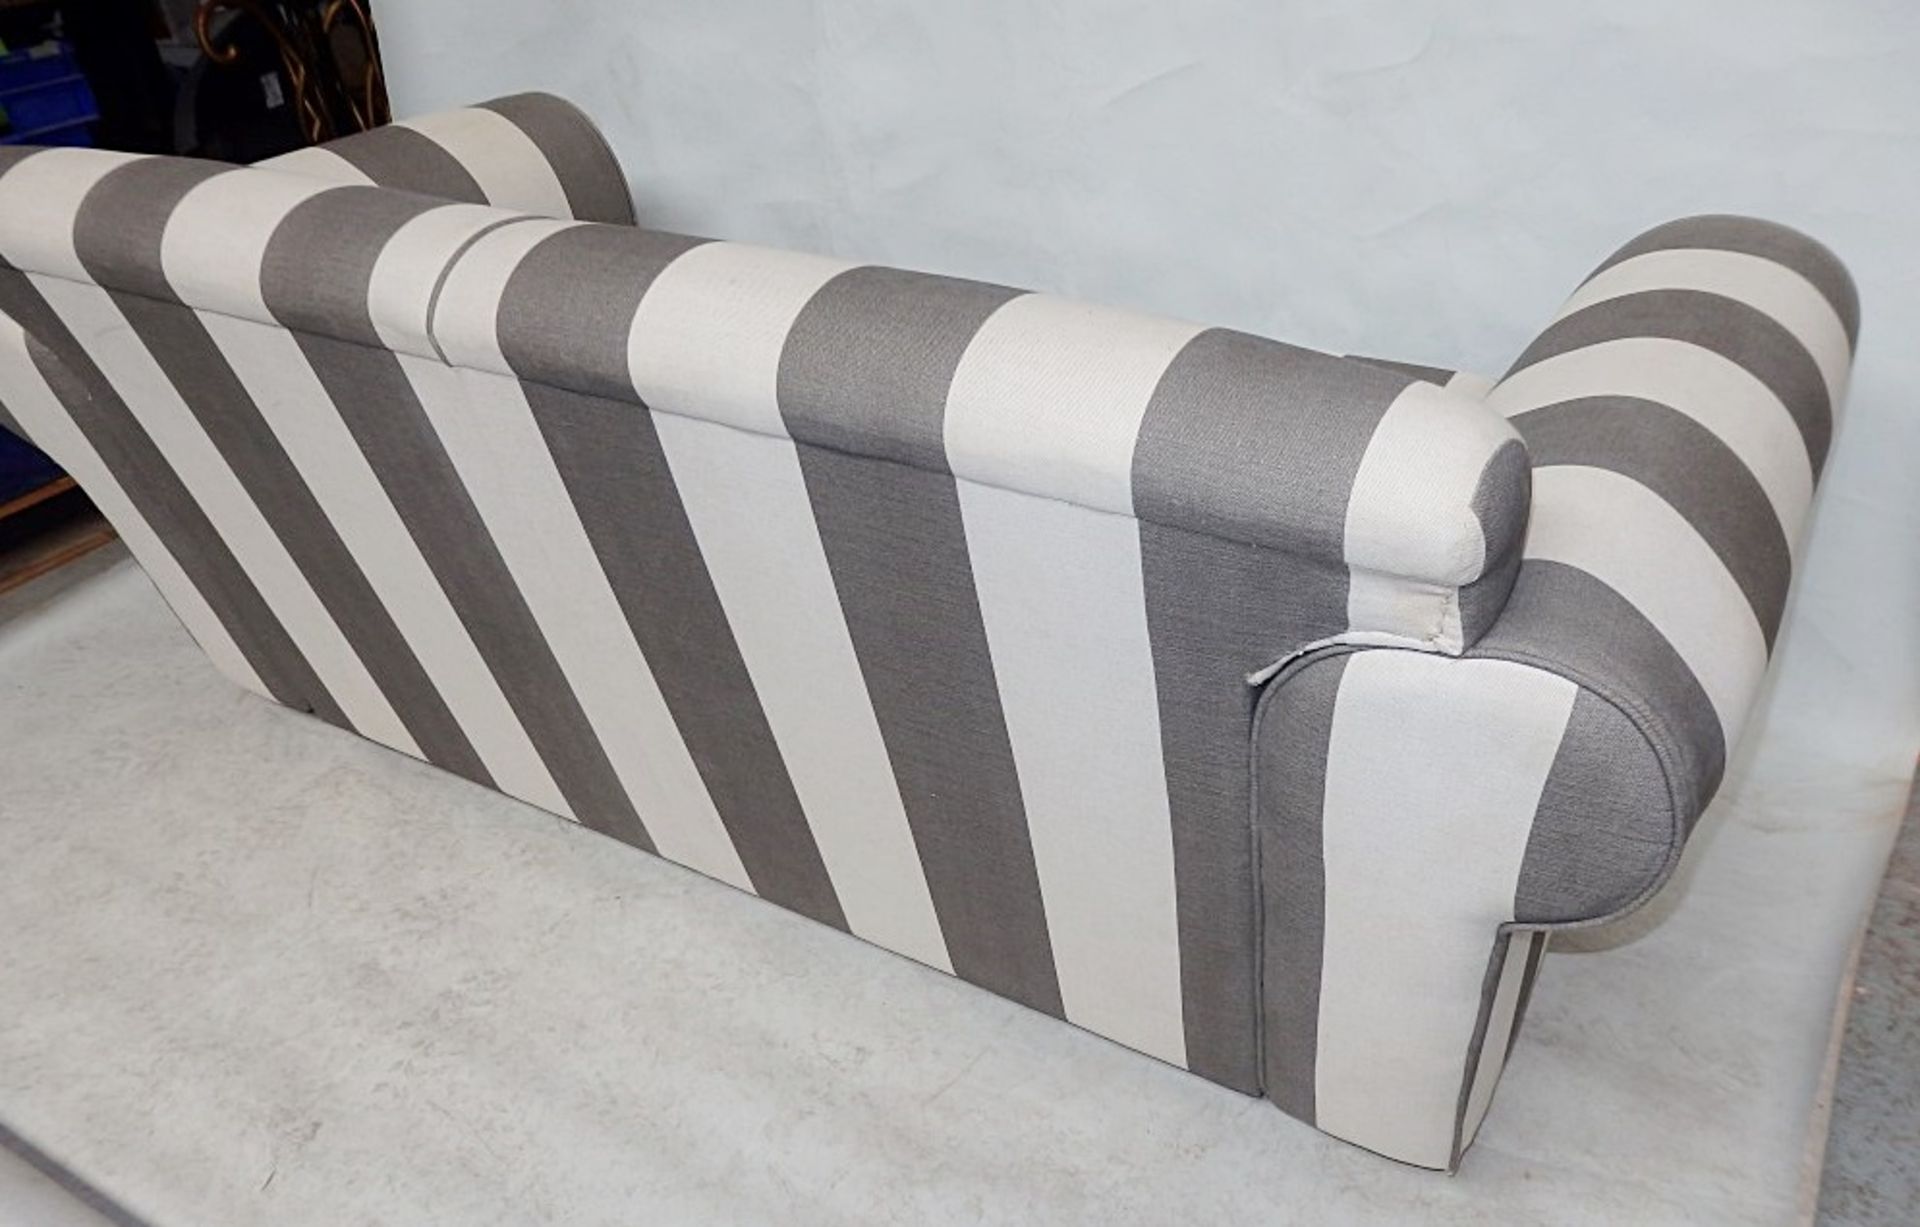 1 x Sumptuous Bespoke Cream & Grey Striped Sofa - Expertly Built And Upholstered By British - Image 5 of 6